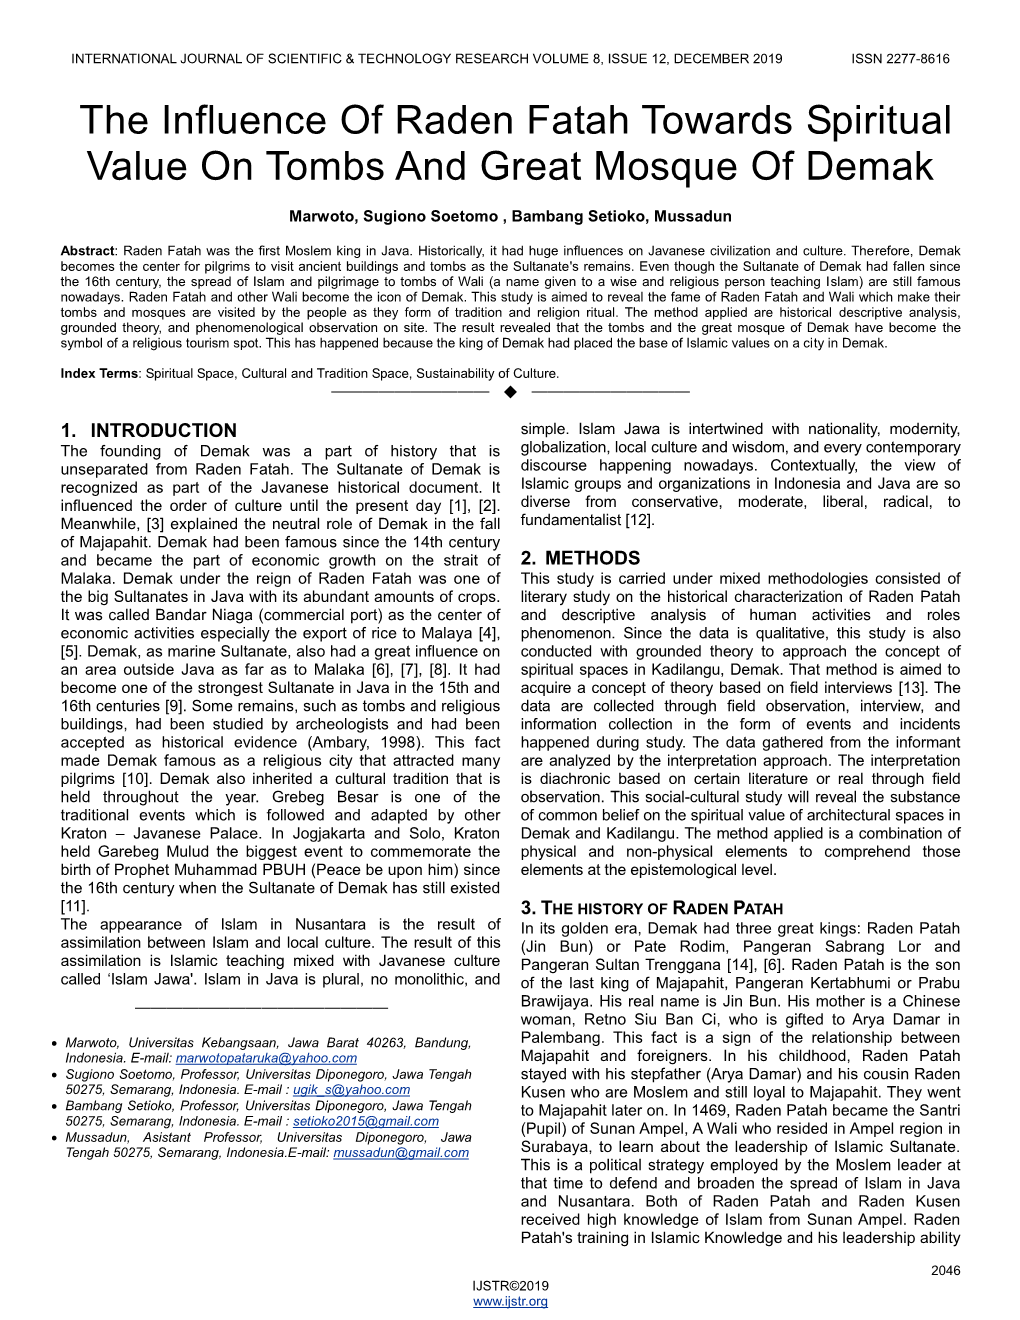 The Influence of Raden Fatah Towards Spiritual Value on Tombs and Great Mosque of Demak